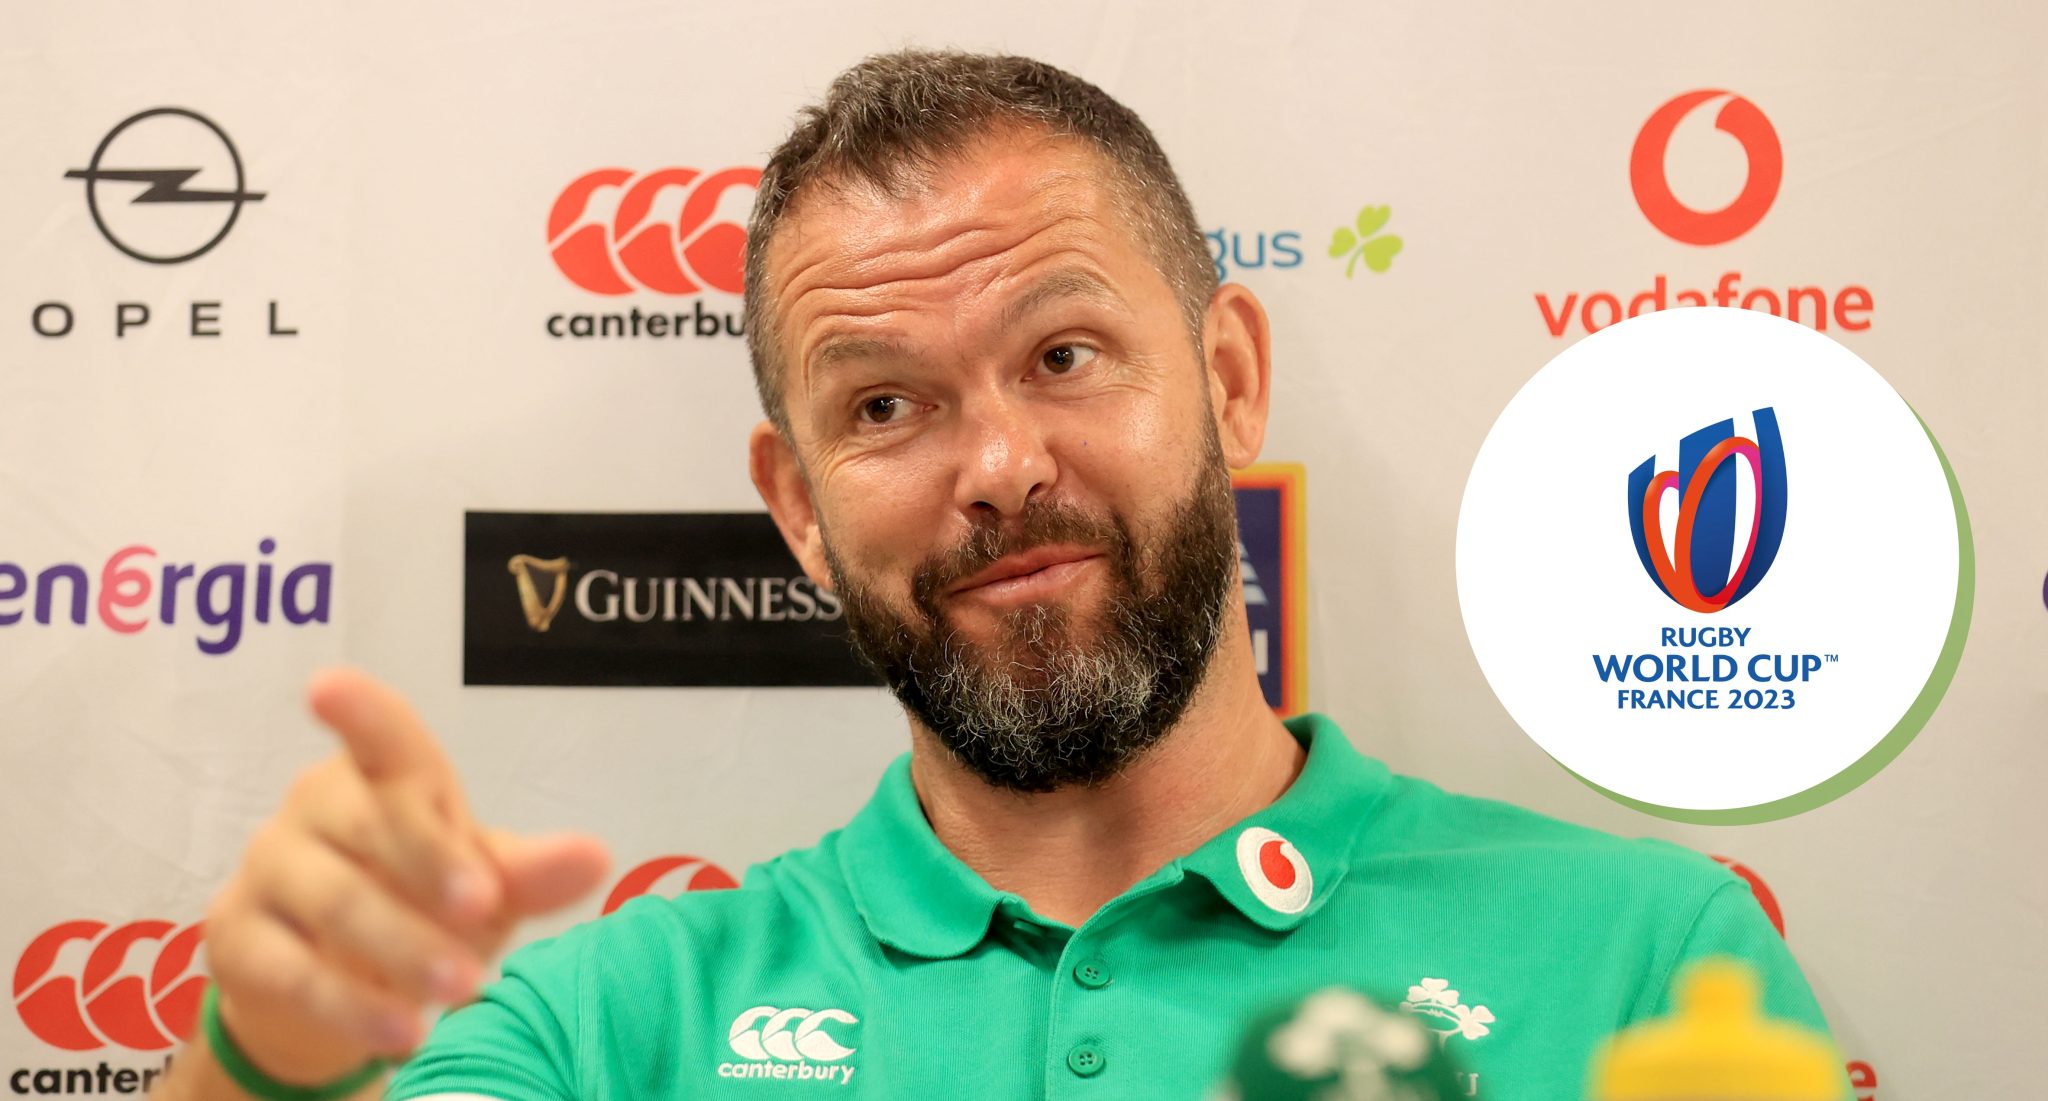 Ireland change date for Rugby World Cup squad announcement